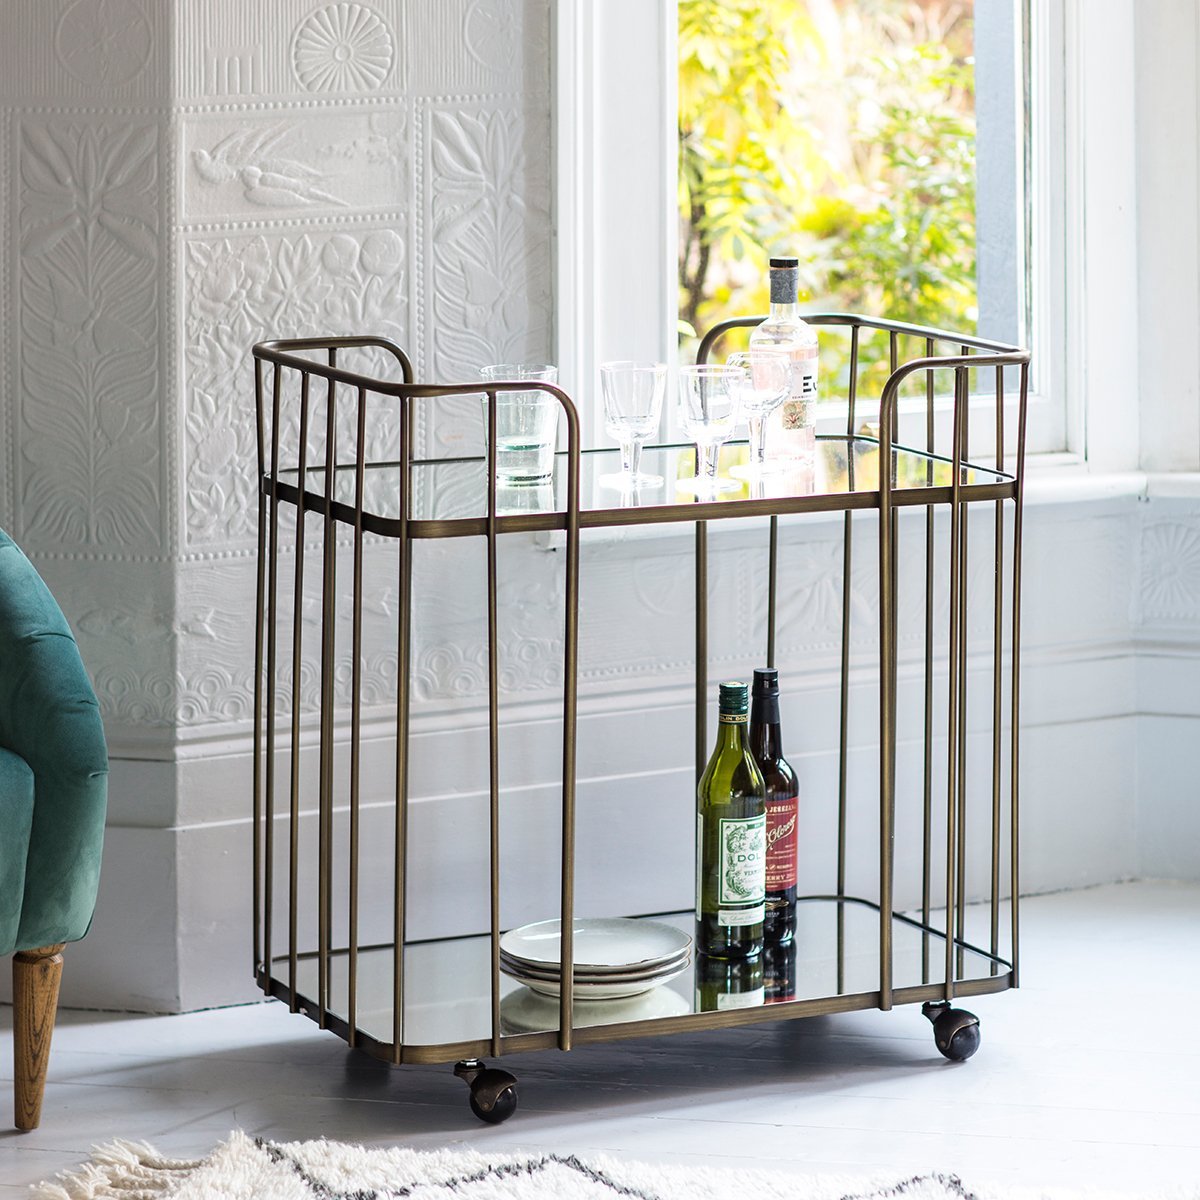 Gallery Interiors Verna Drinks Trolley Bronze | Outlet